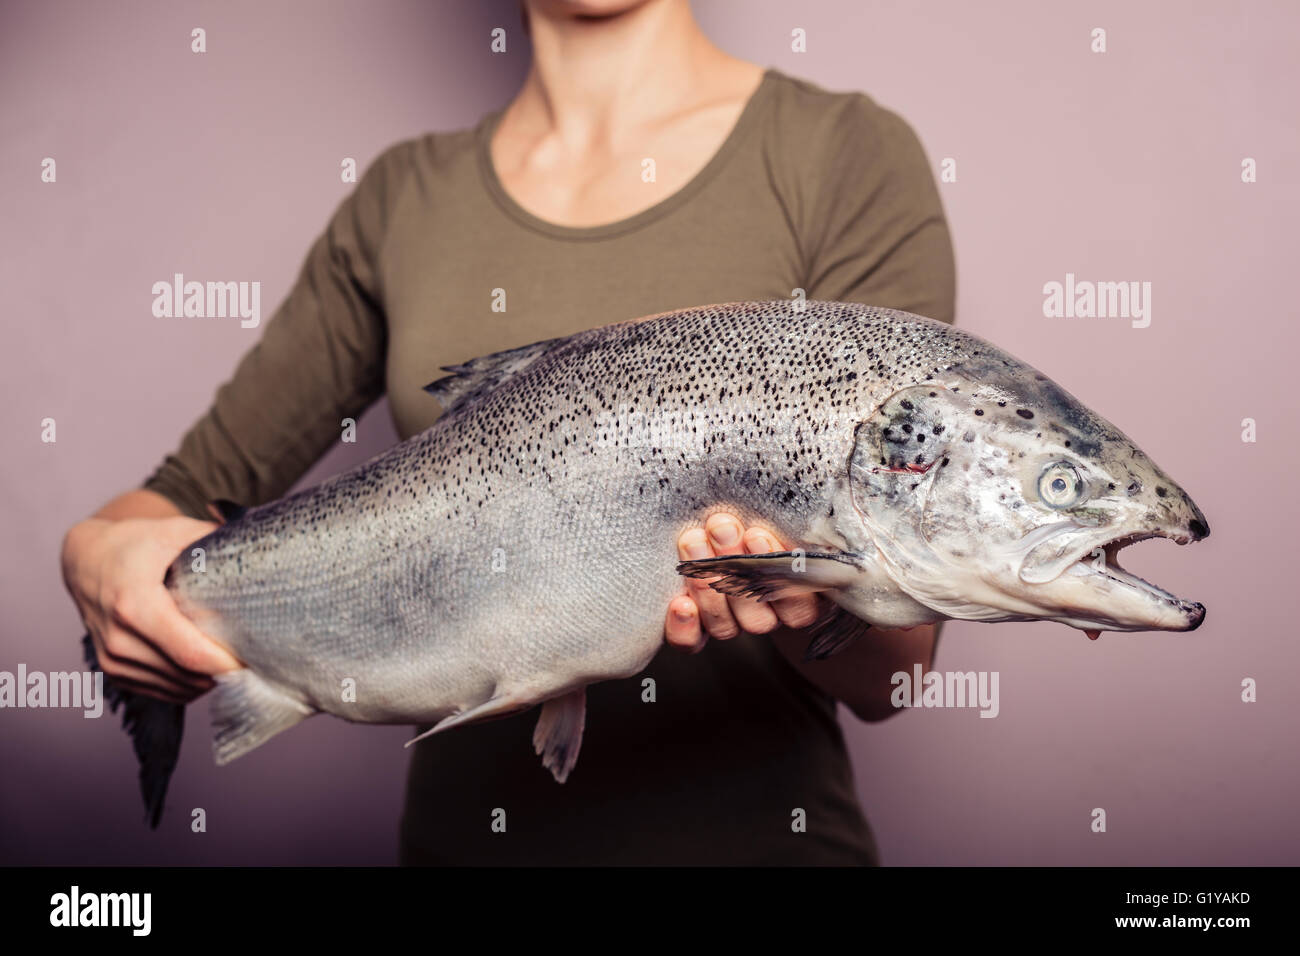 A young woman is posing with a large atlantic salmon in her hands Stock Photo